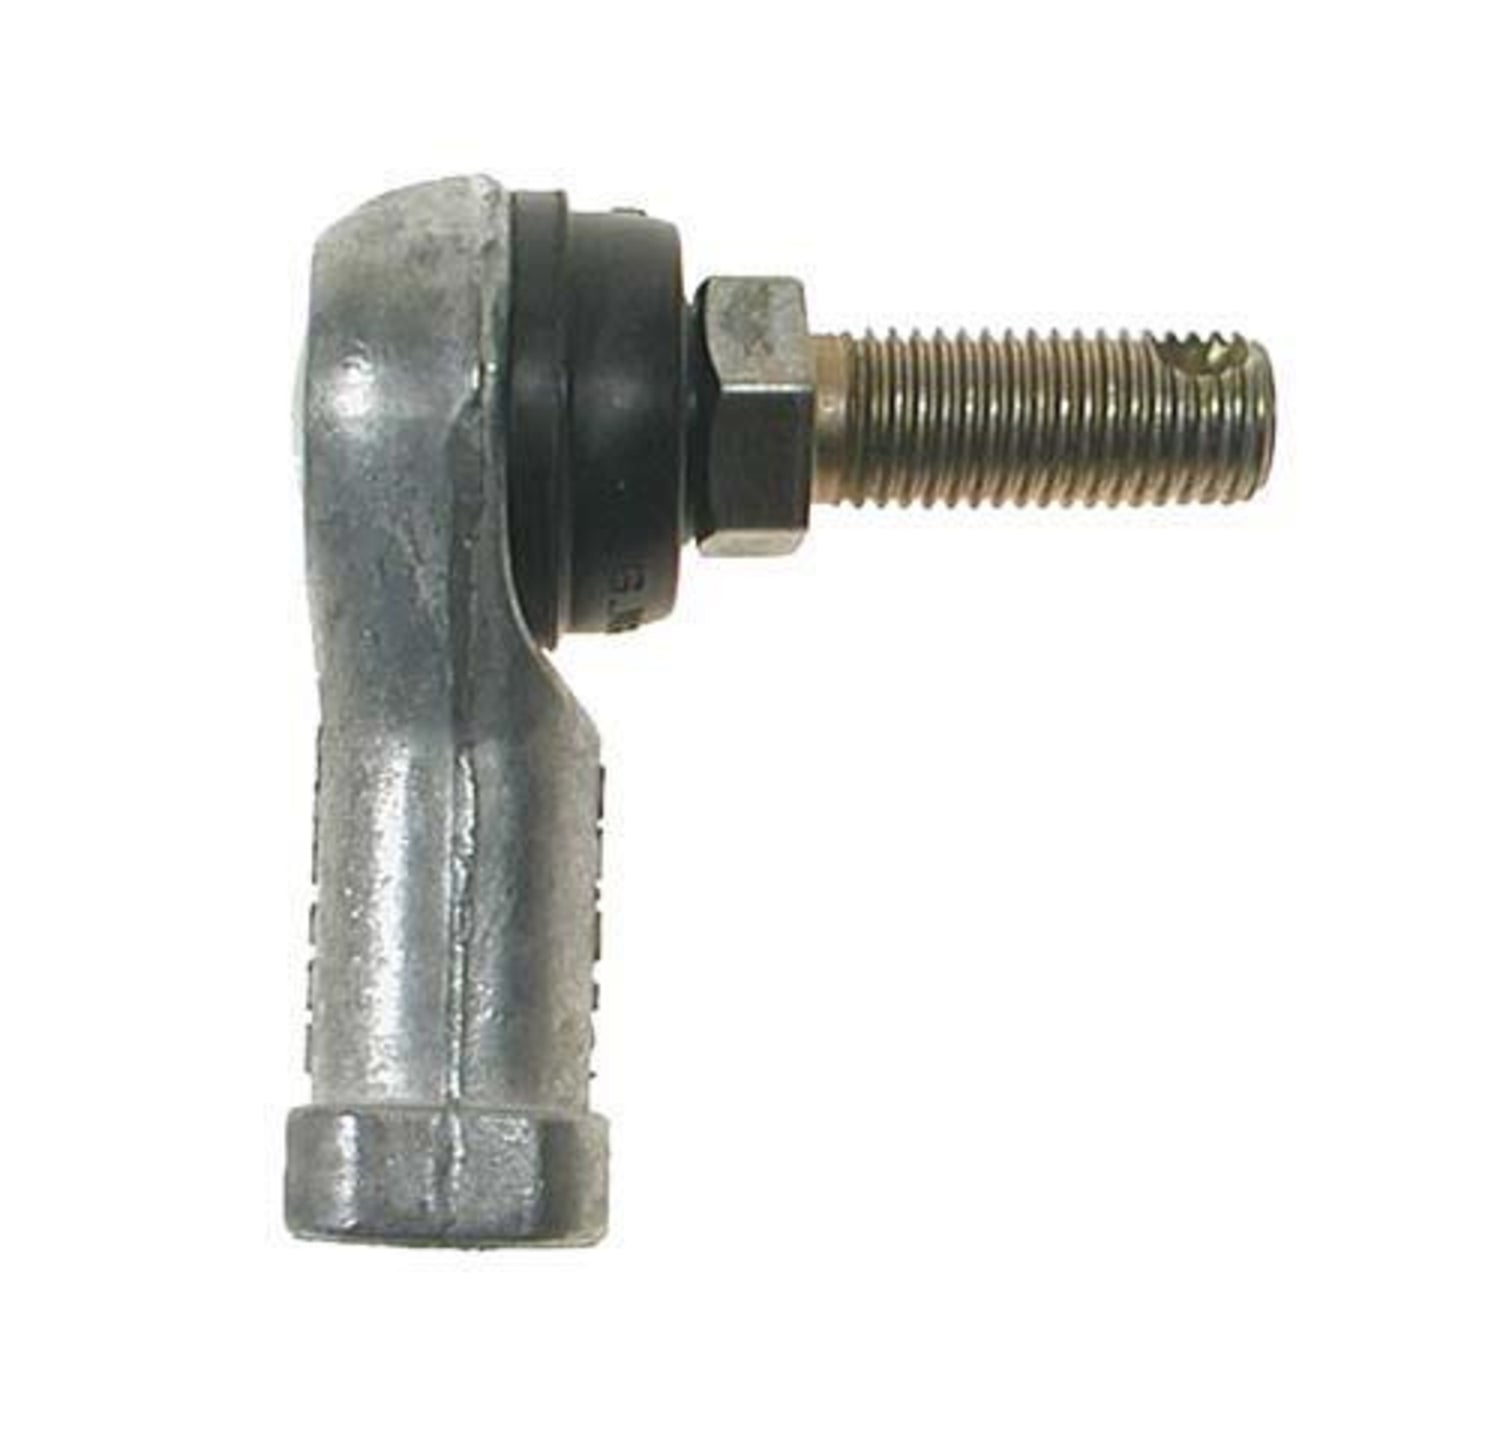 Yamaha Gas 4-Cycle Right-Threaded Tie Rod End (Models G16-G21)